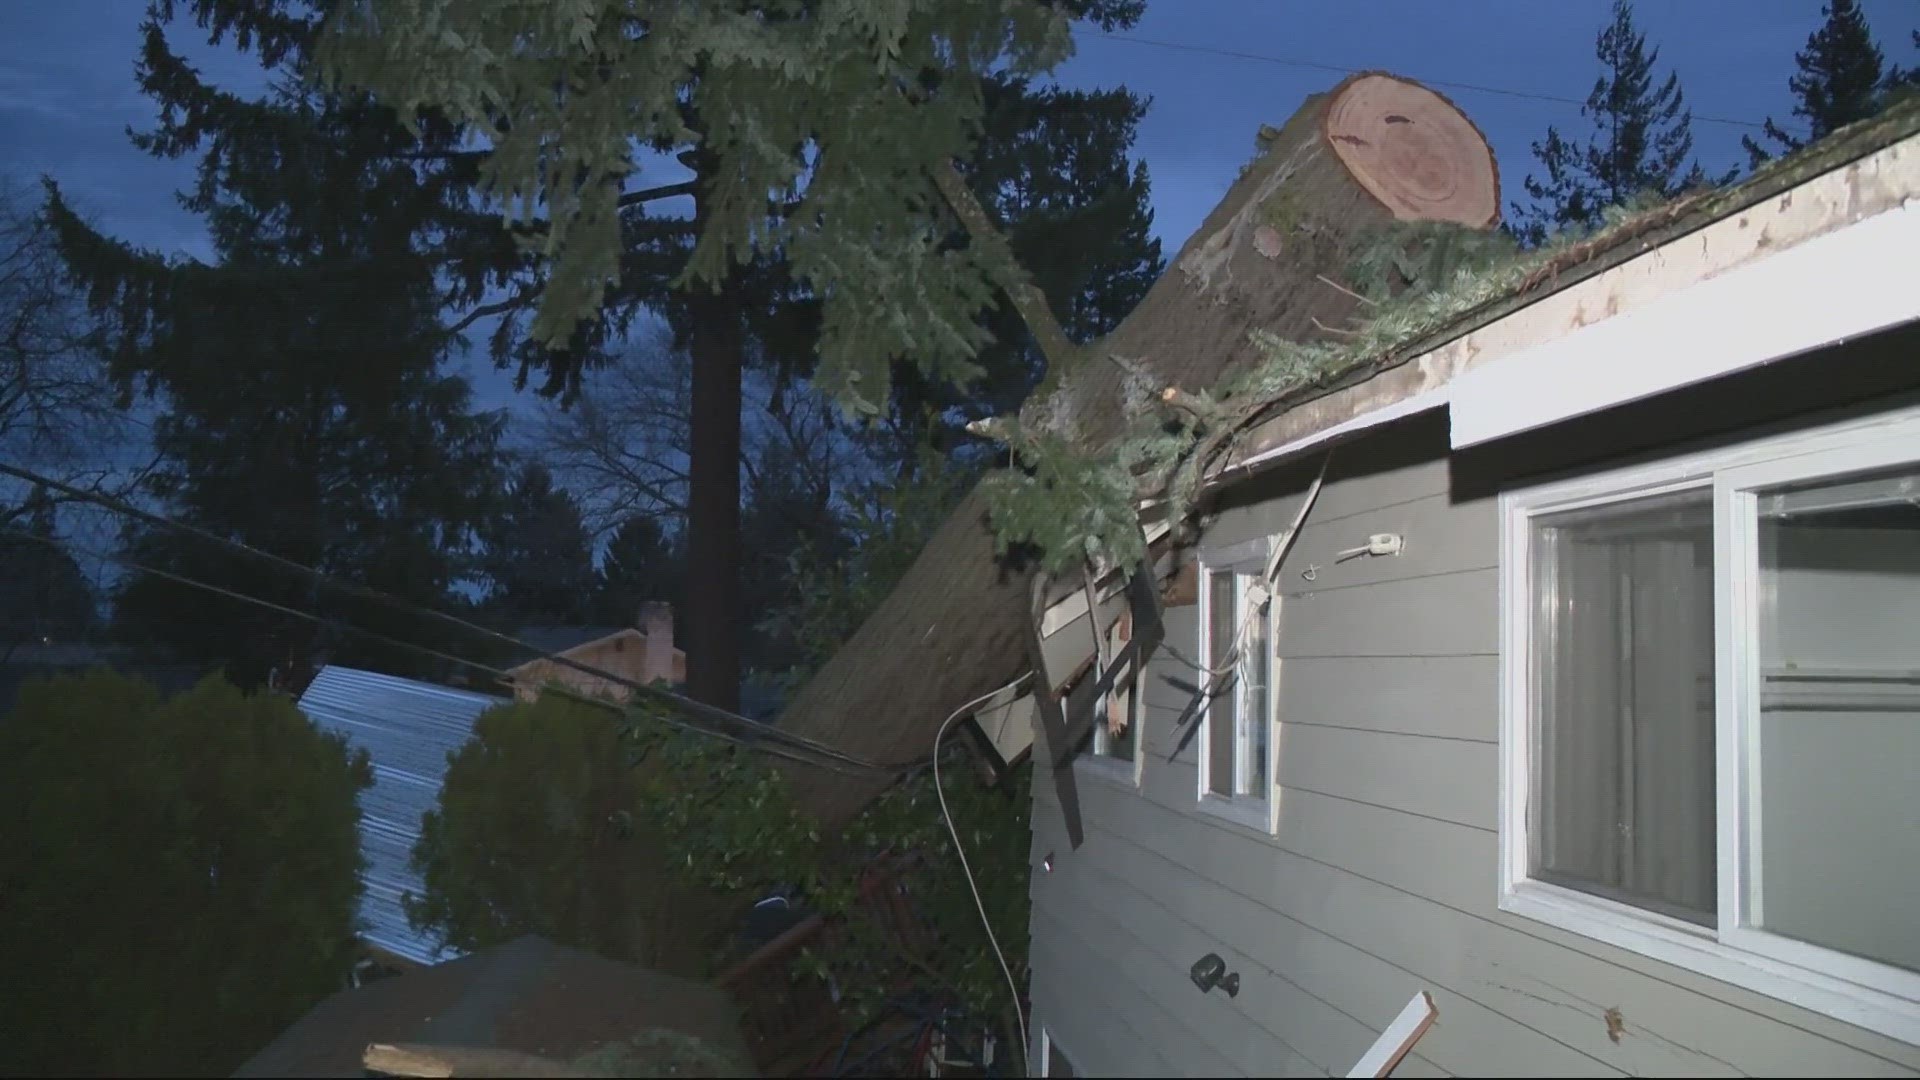 Alison Neighbor and her family are dealing with the aftermath of the storm, after a tree crashed through their roof.